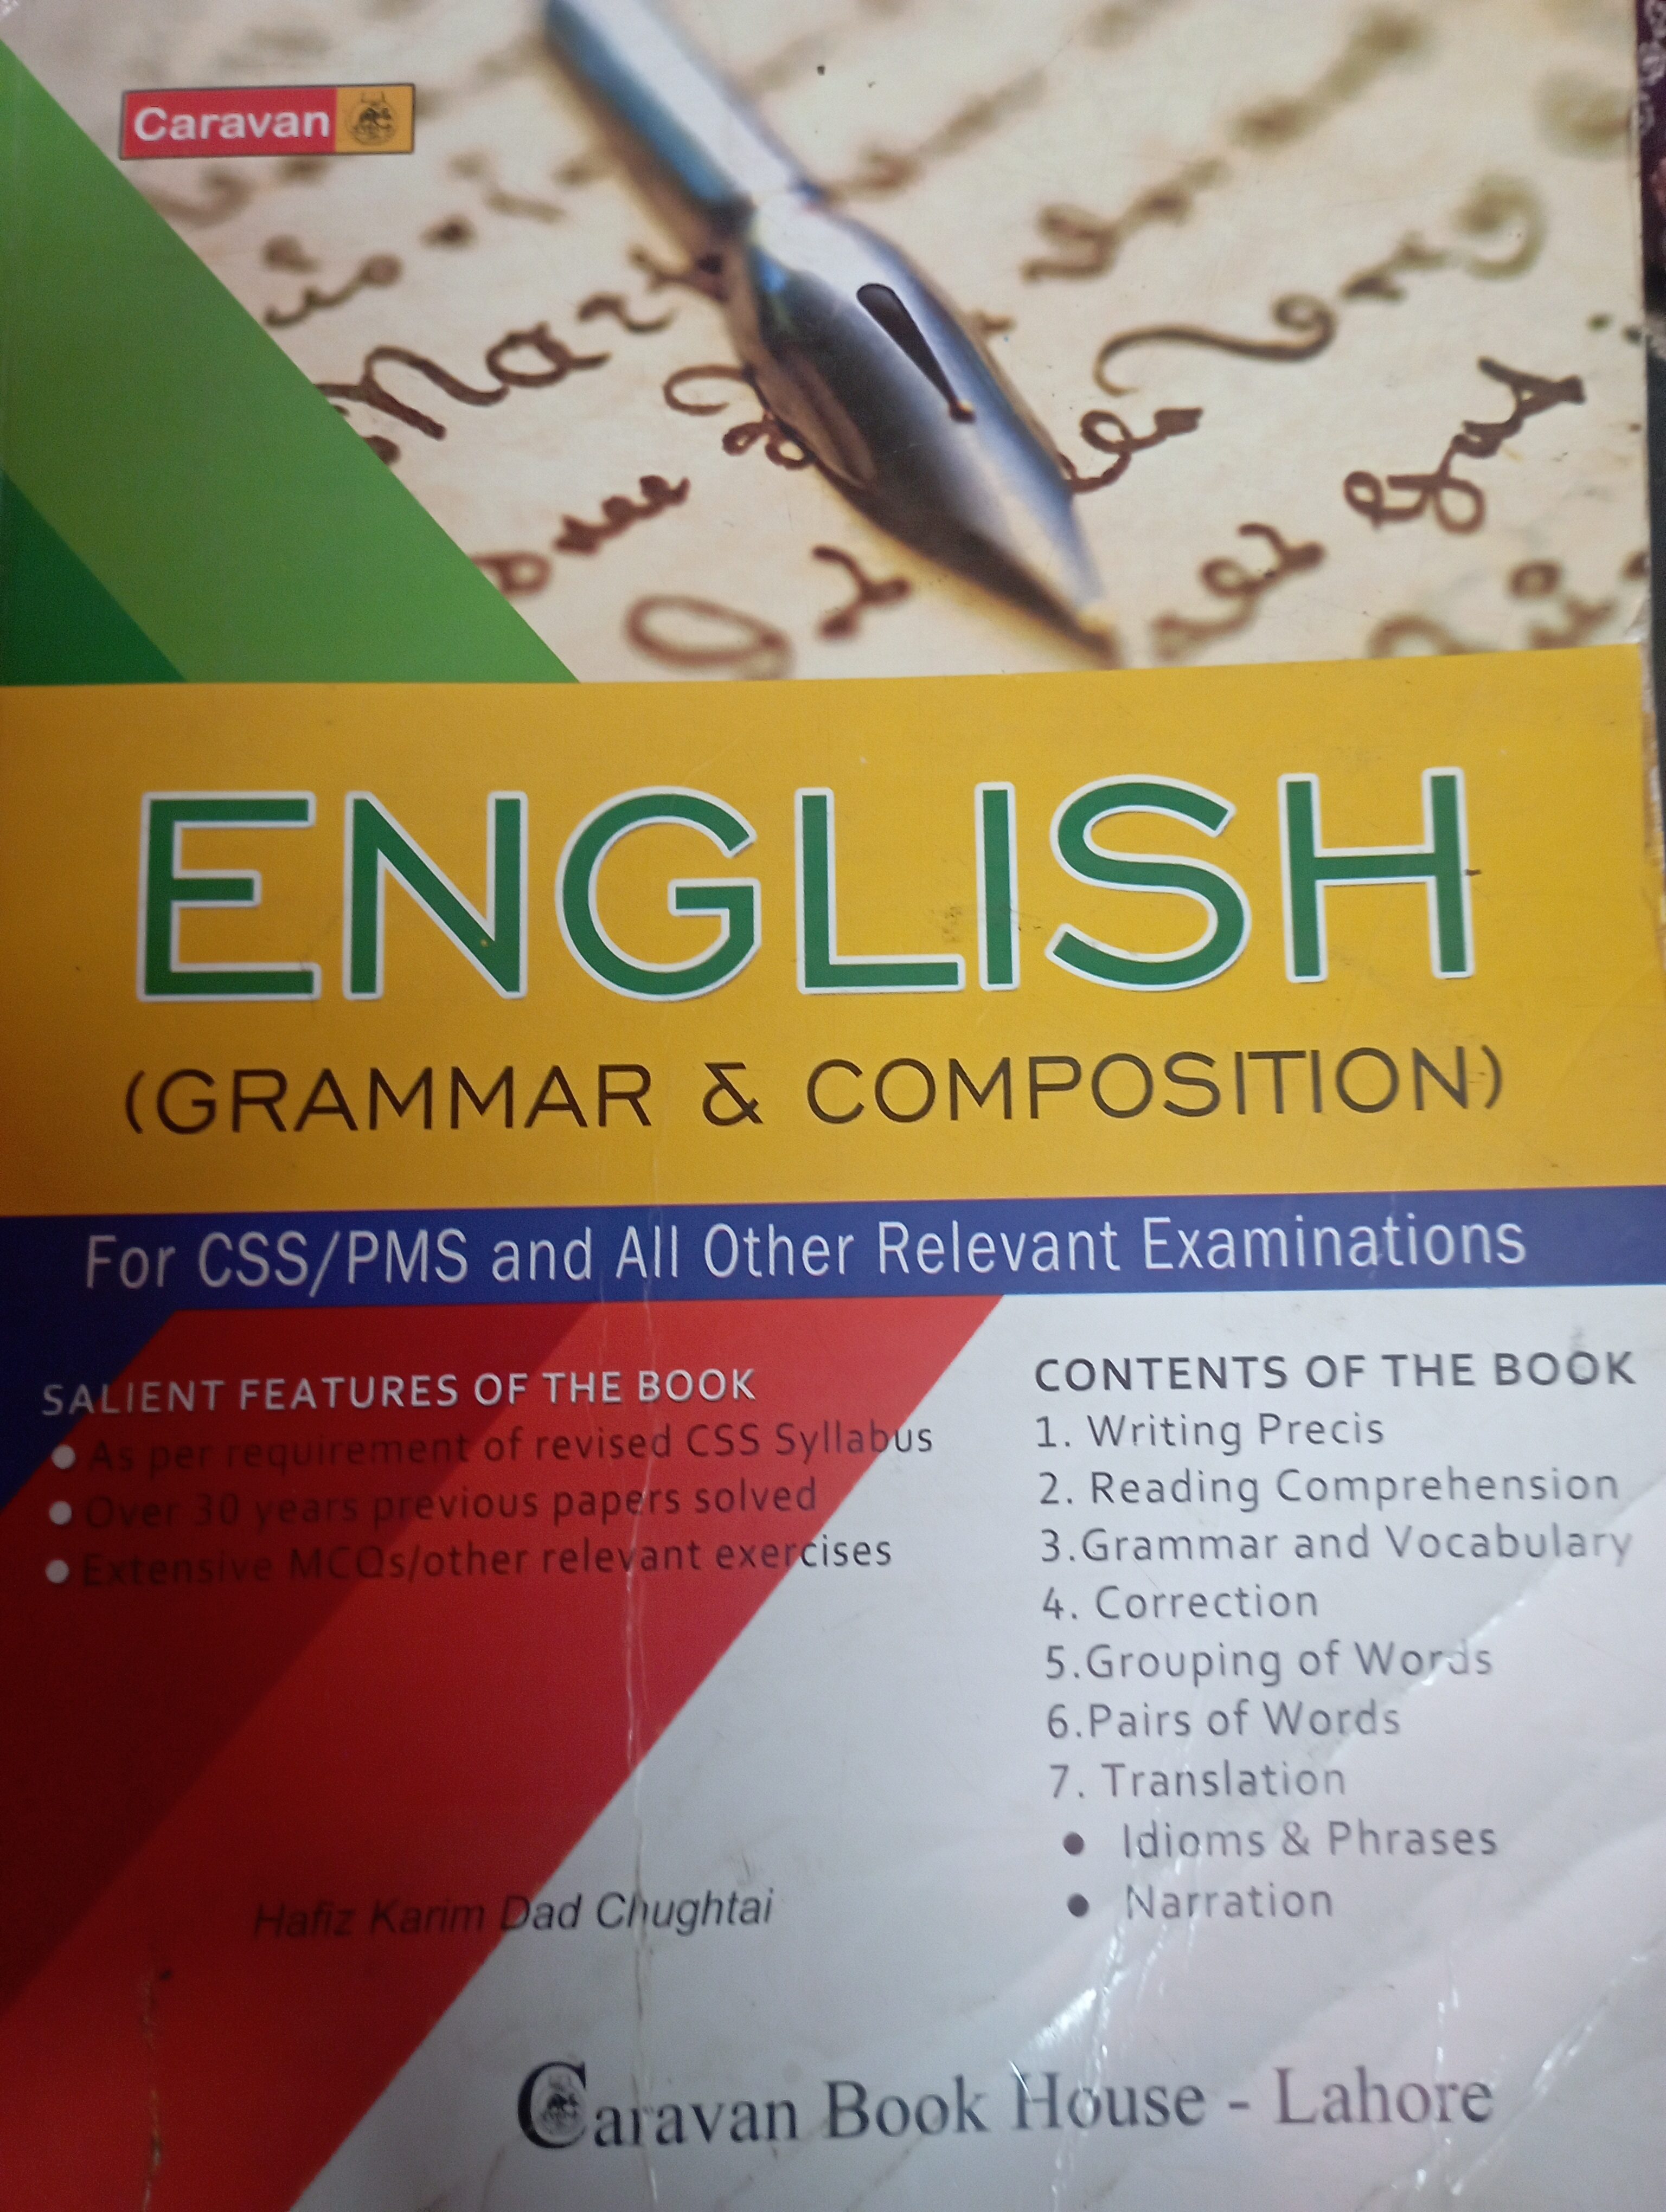 English grammar and composition for CsS/pms